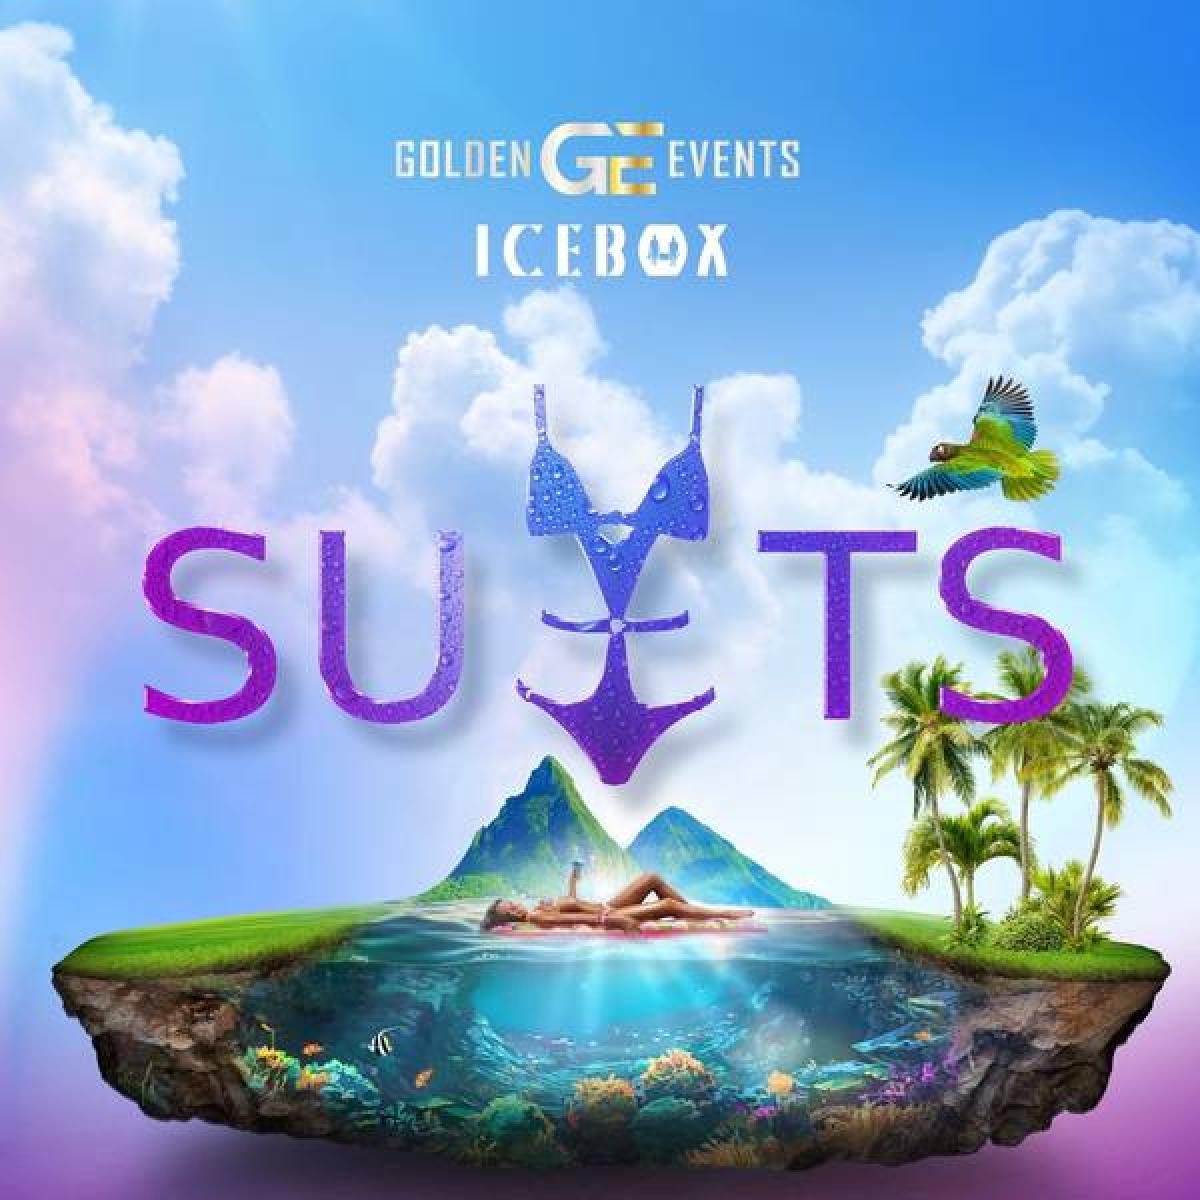 SUITS St. Lucia flyer or graphic.